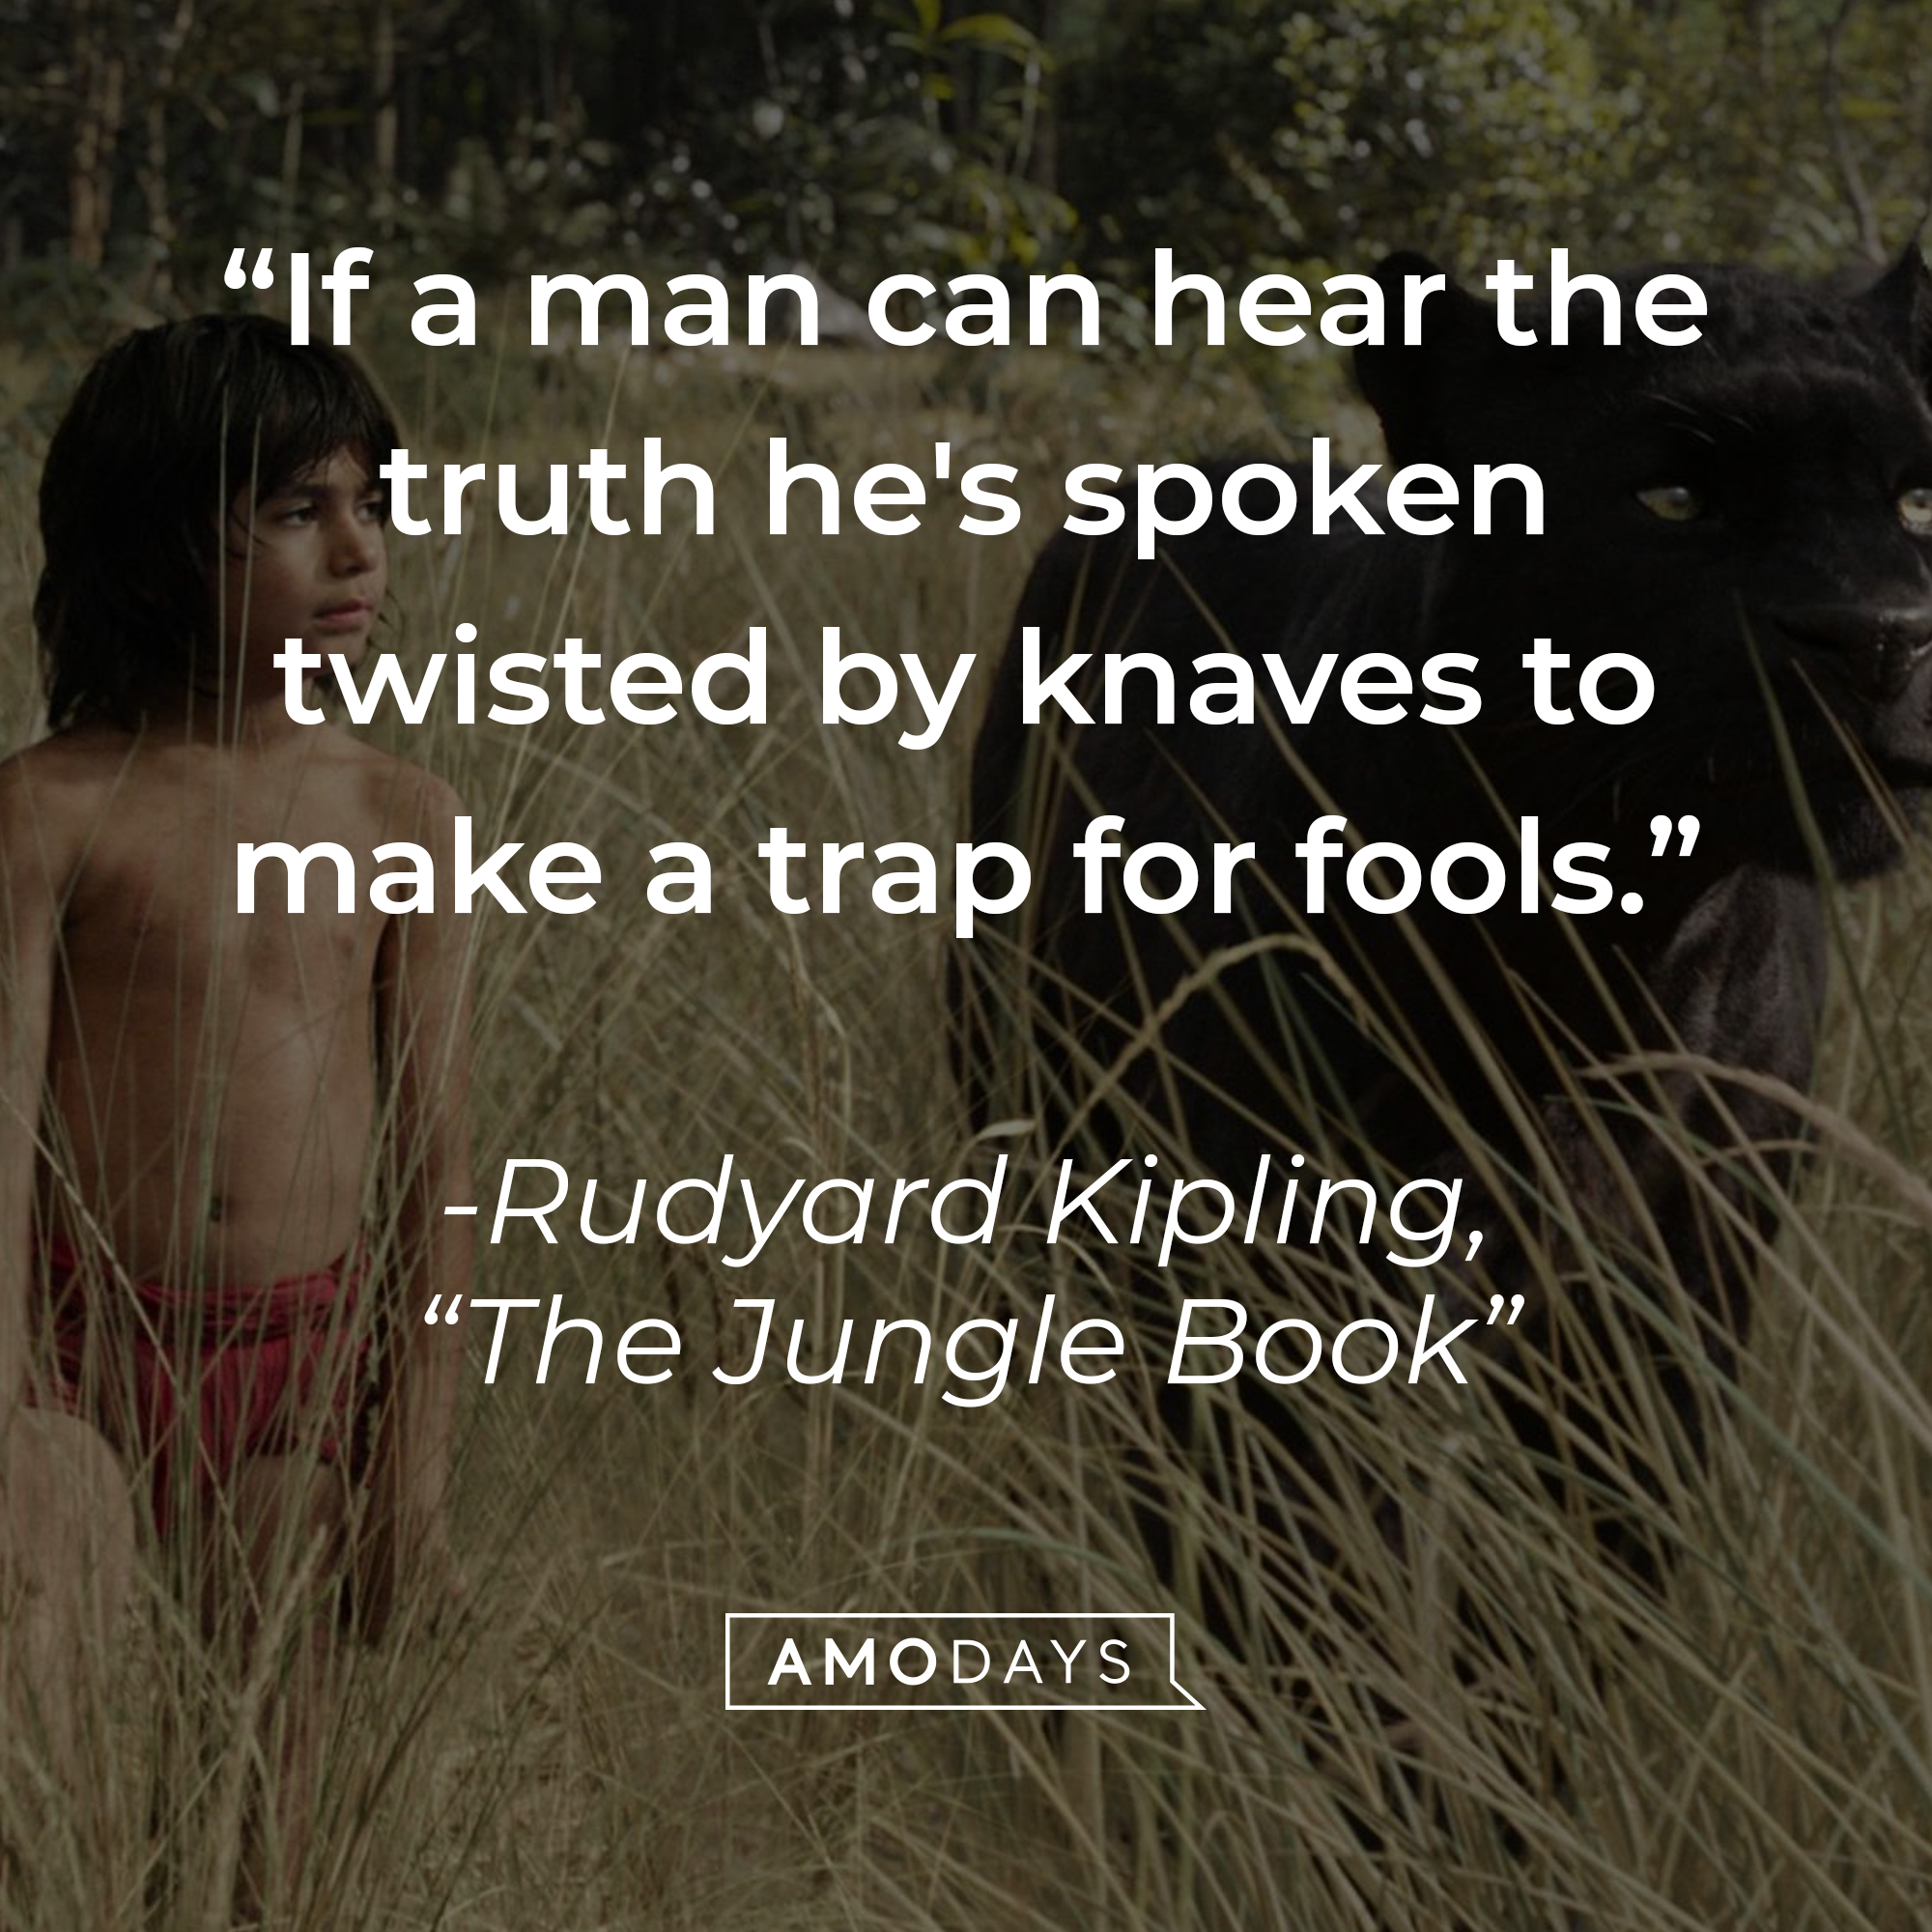 Rudyard Kipling's quote: "If a man can hear the truth he's spoken twisted by knaves to make a trap for fools." | Source: facebook.com/DisneyJungleBook